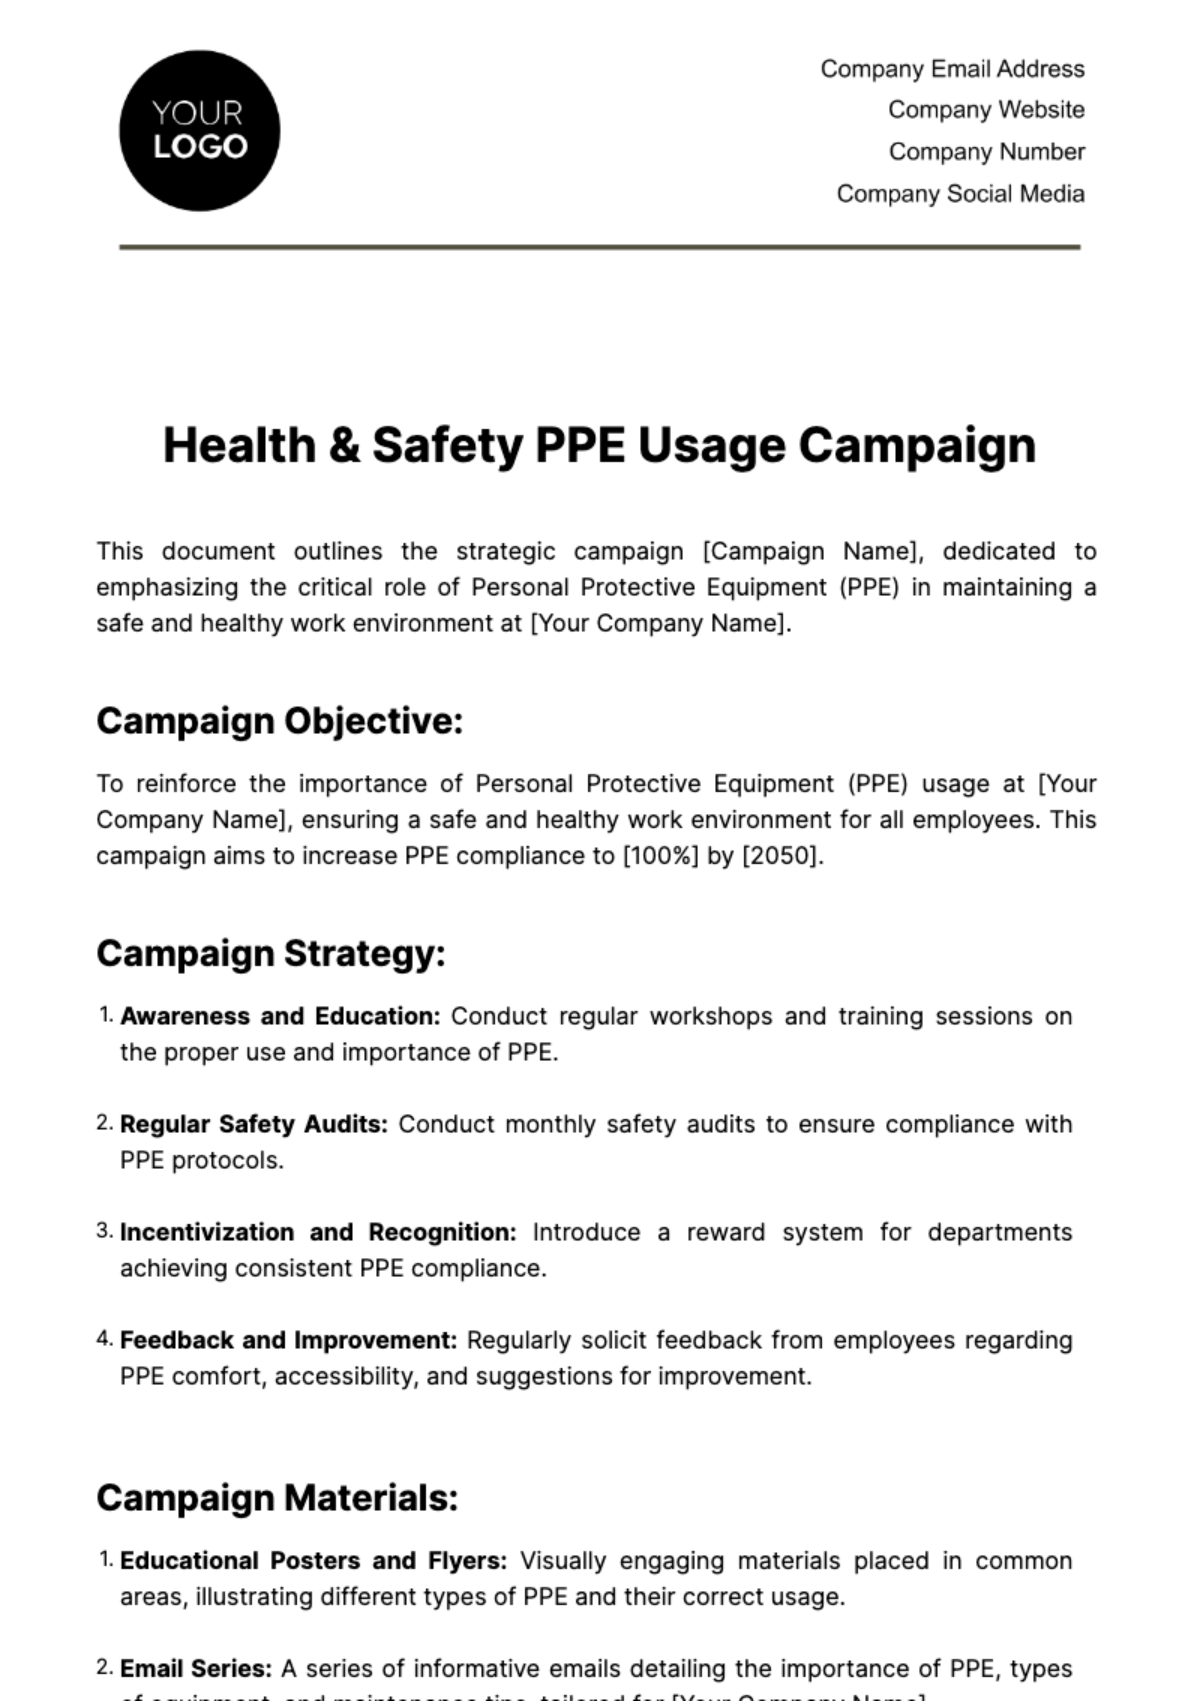 Health & Safety PPE Usage Campaign Template